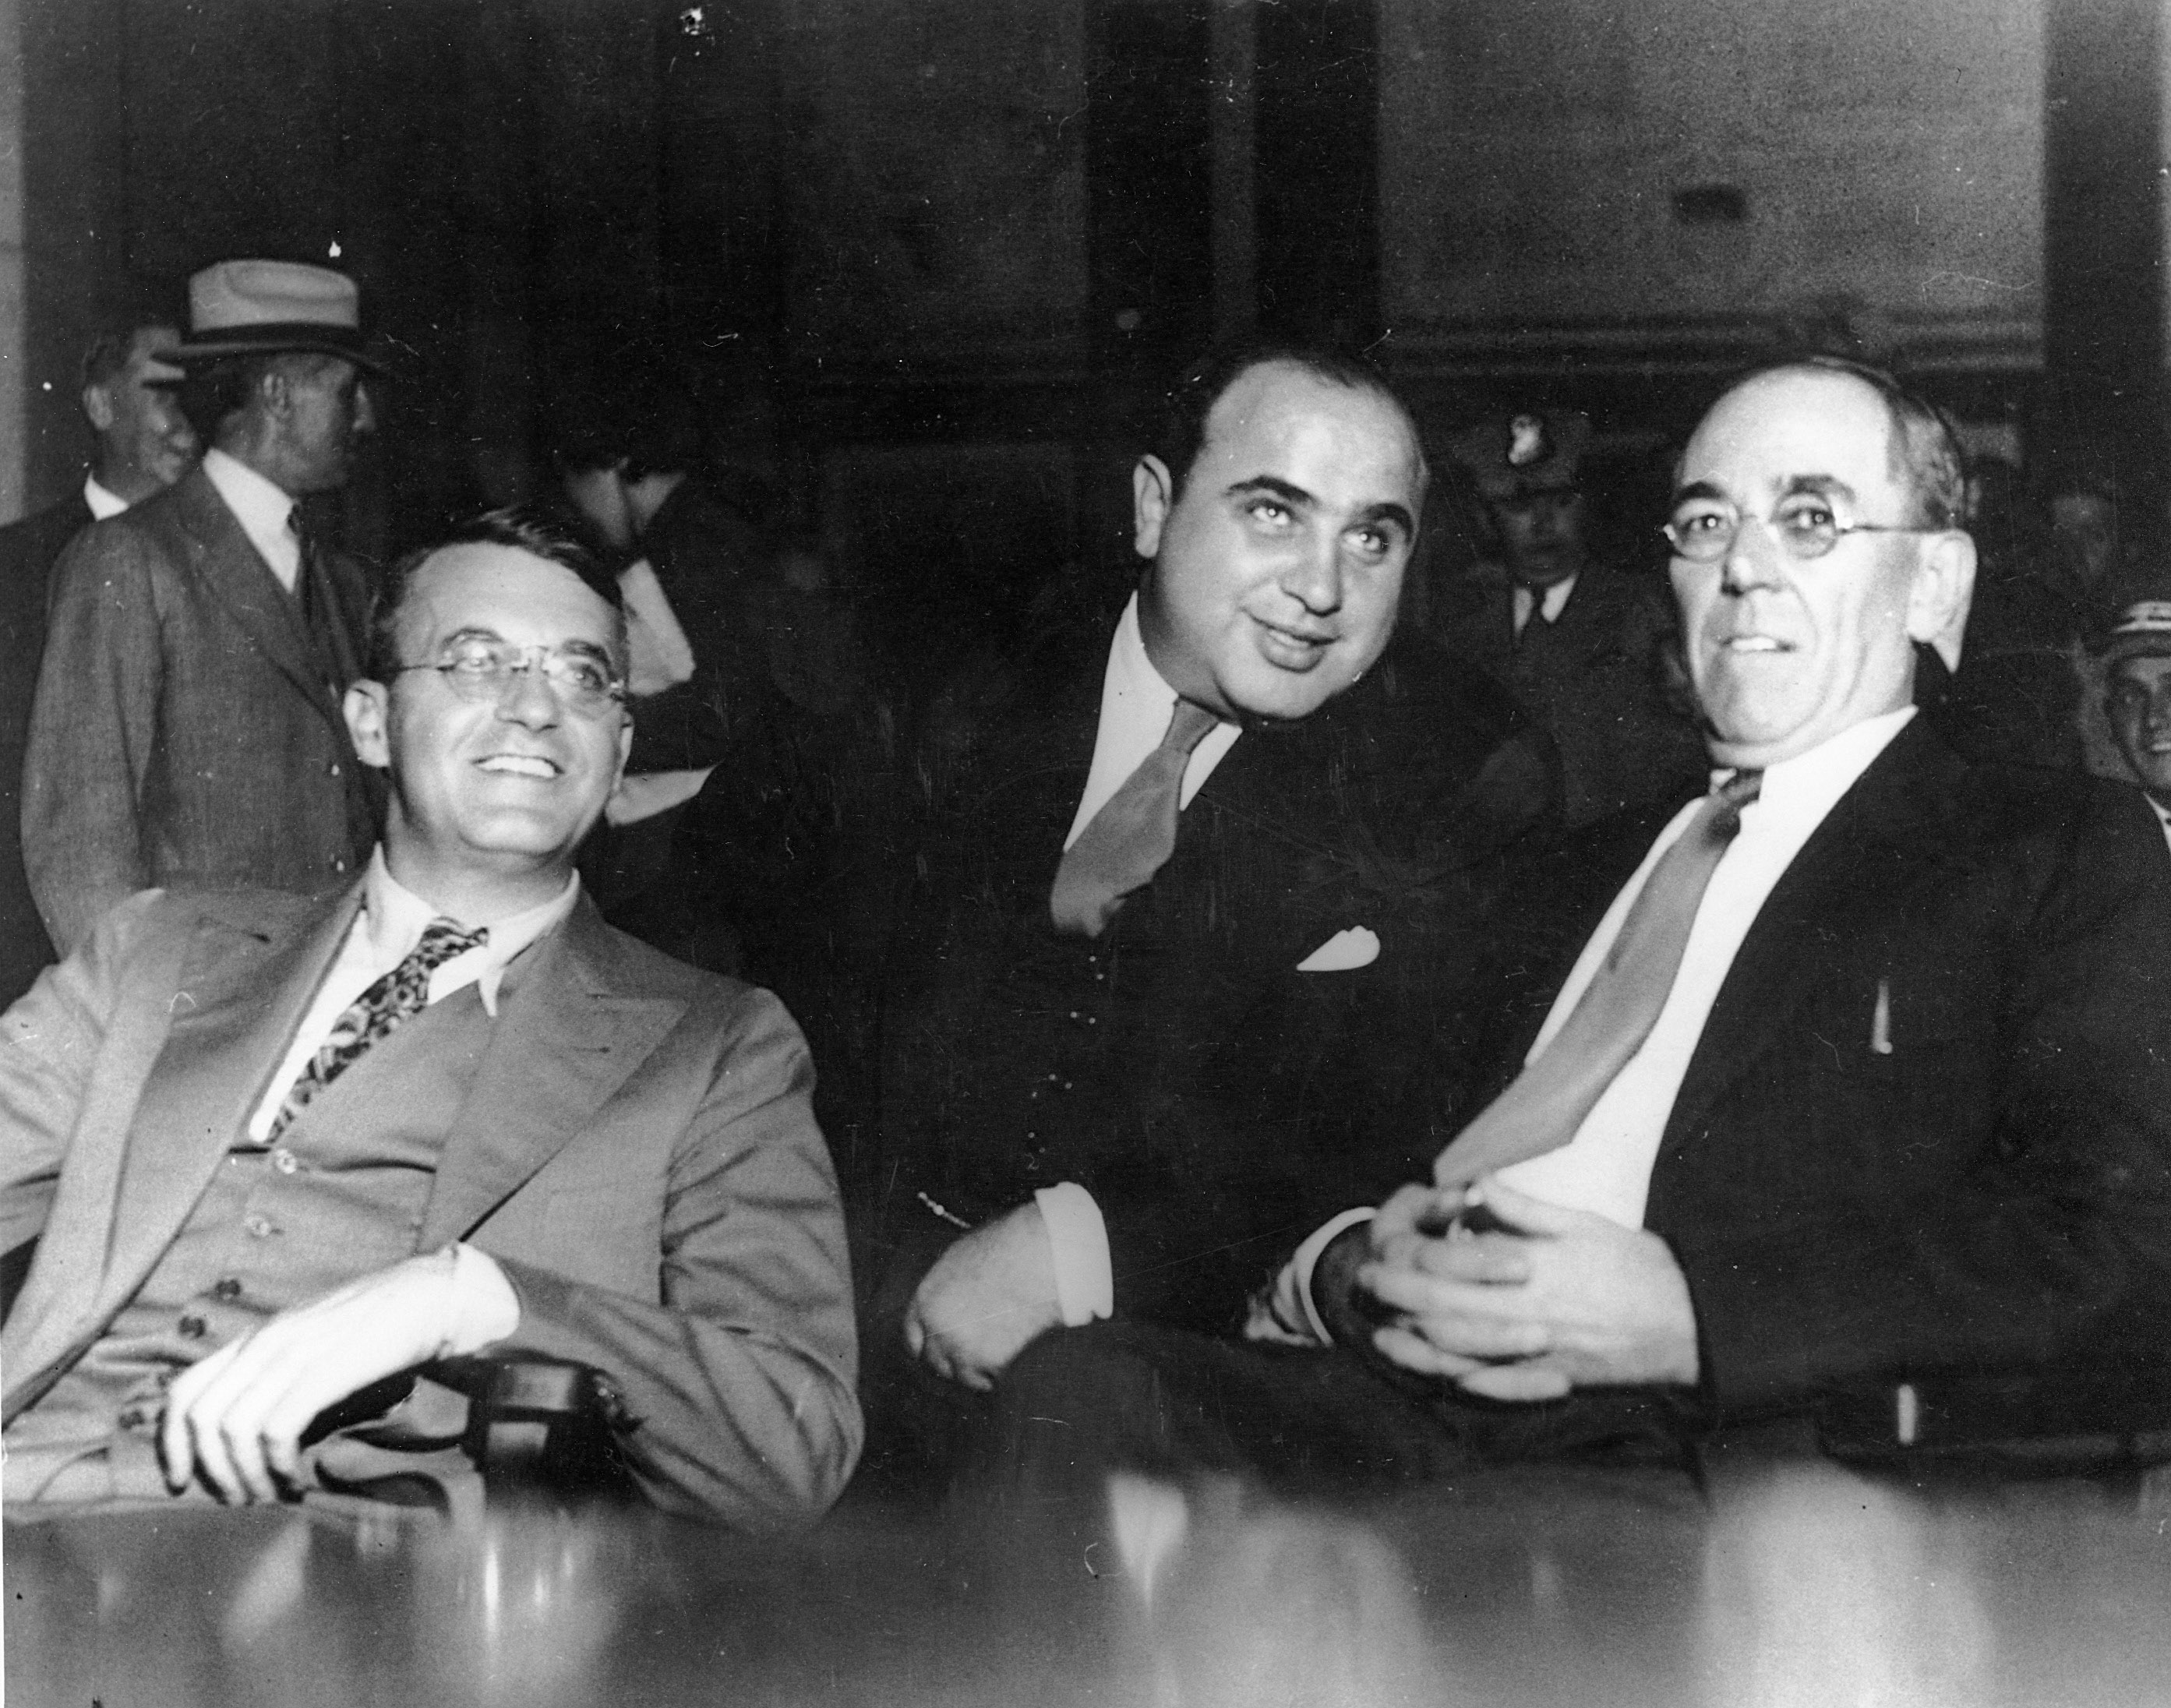 Al Capone Gangster Weekend, Events